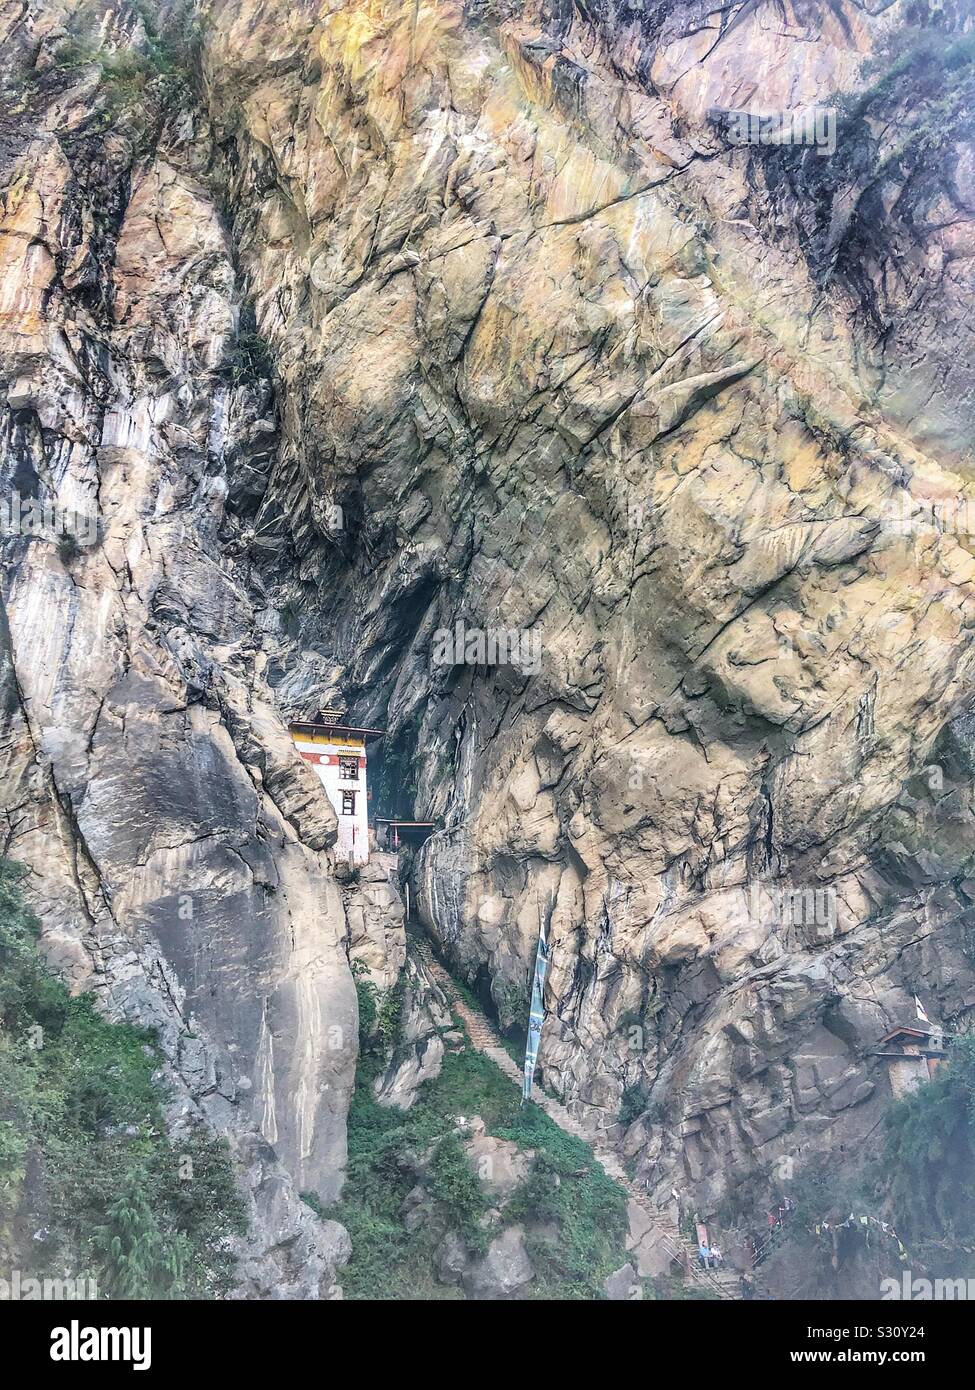 A small temple built into the rock in Bhutan. Stock Photo